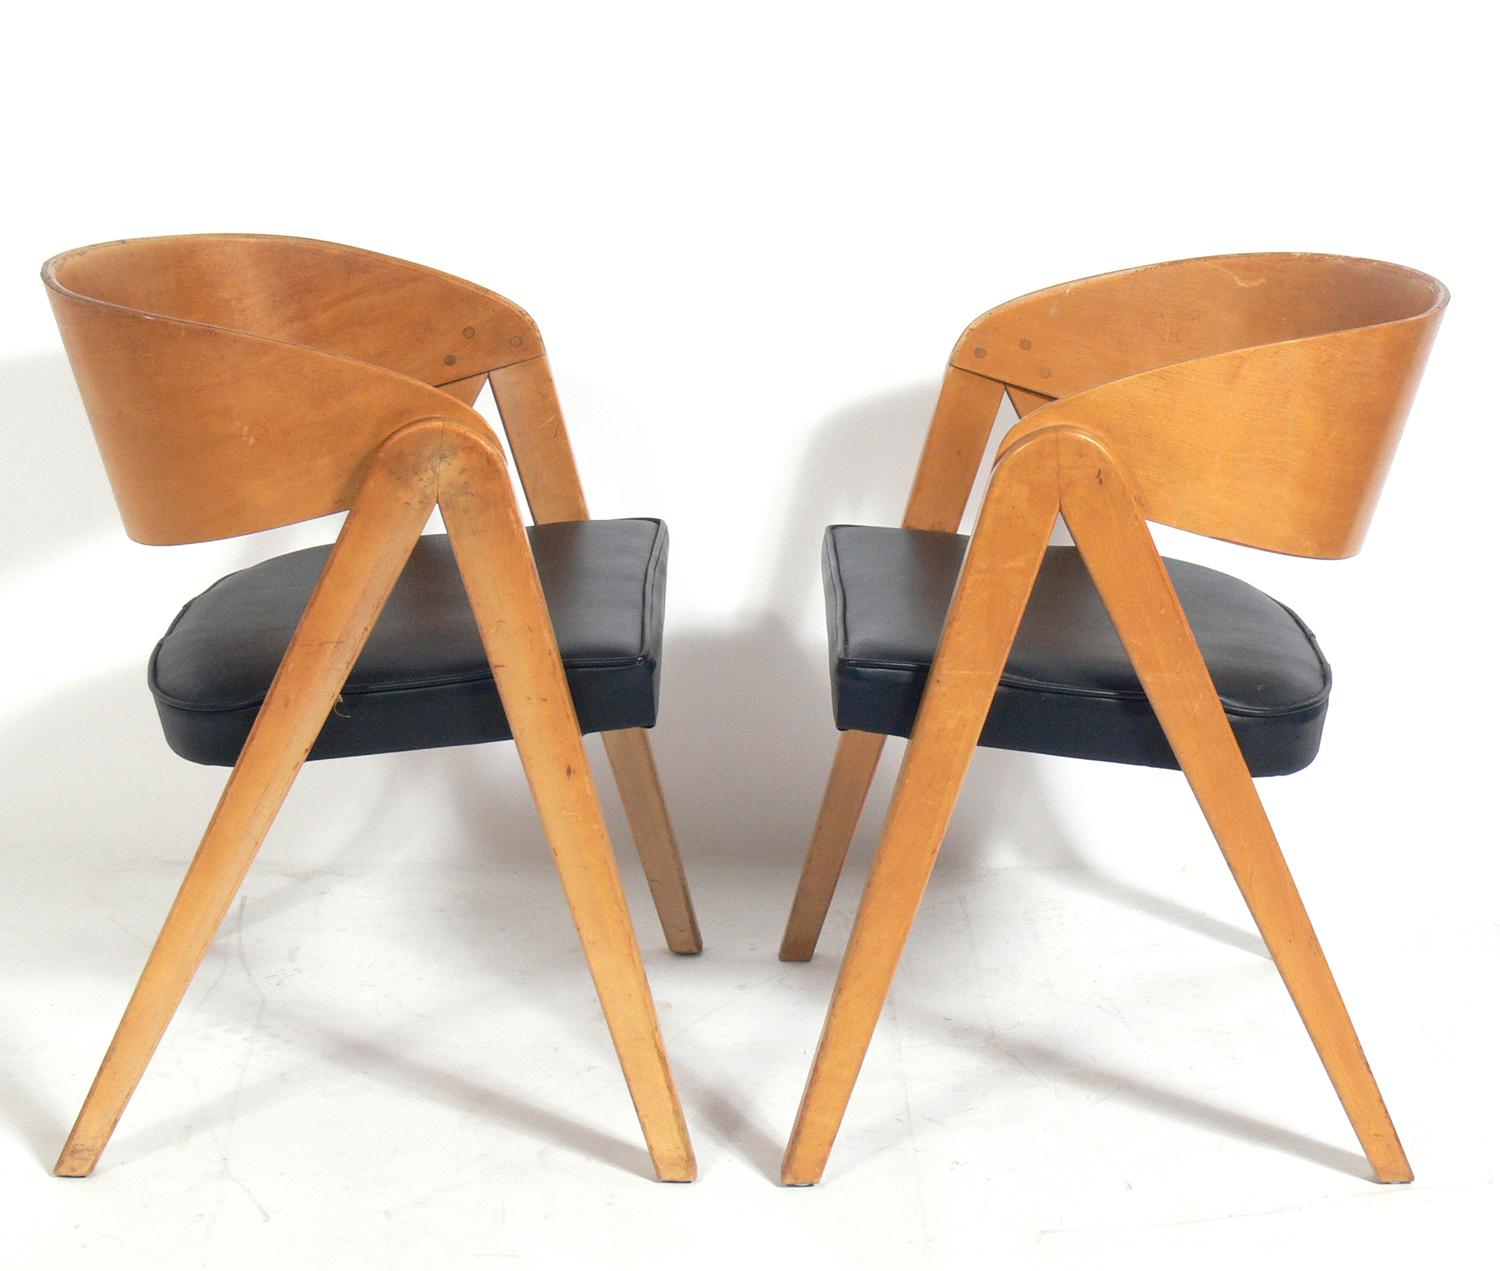 Sculptural compass form chairs, designed by Allan Gould, American, circa 1950s. They retain their original patina and wear. If you prefer, we can refinish them for an additional $450.